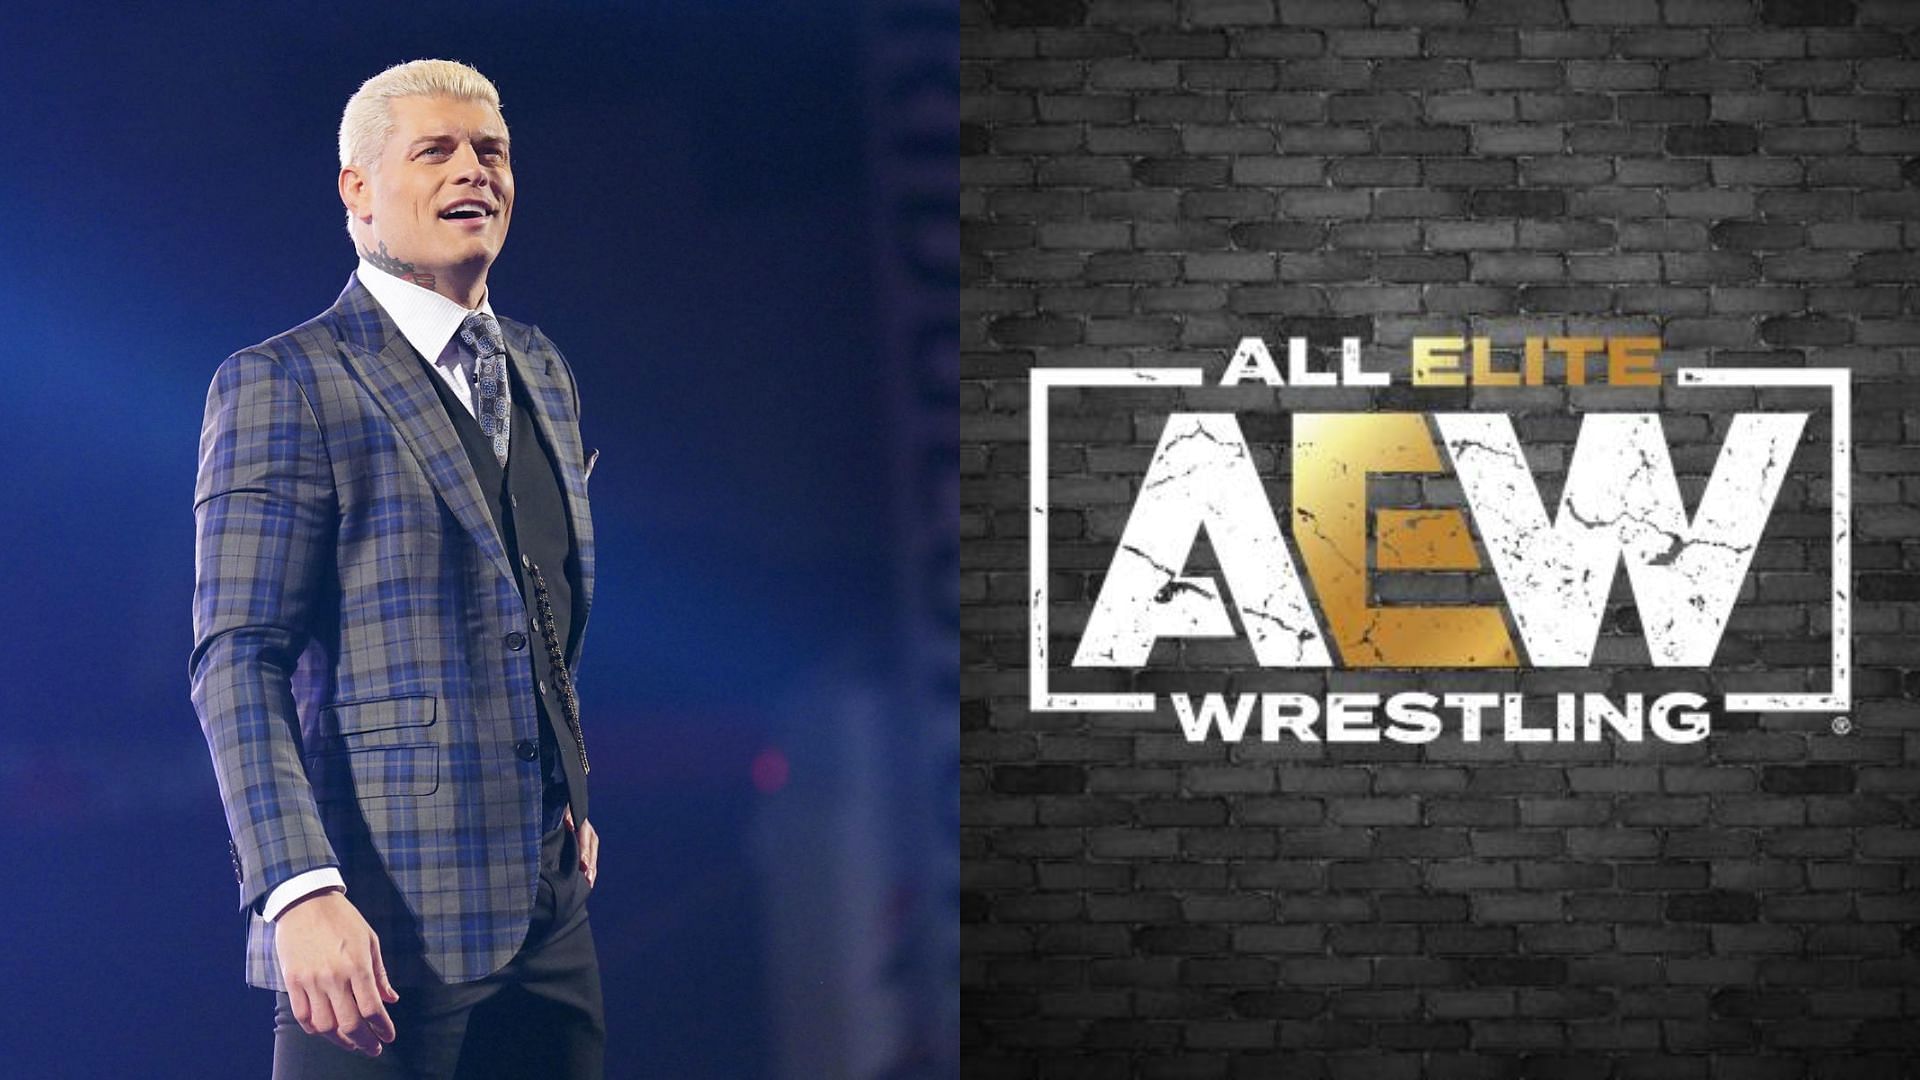 Cody Rhodes faced off against a former AEW star at WWE Royal Rumble